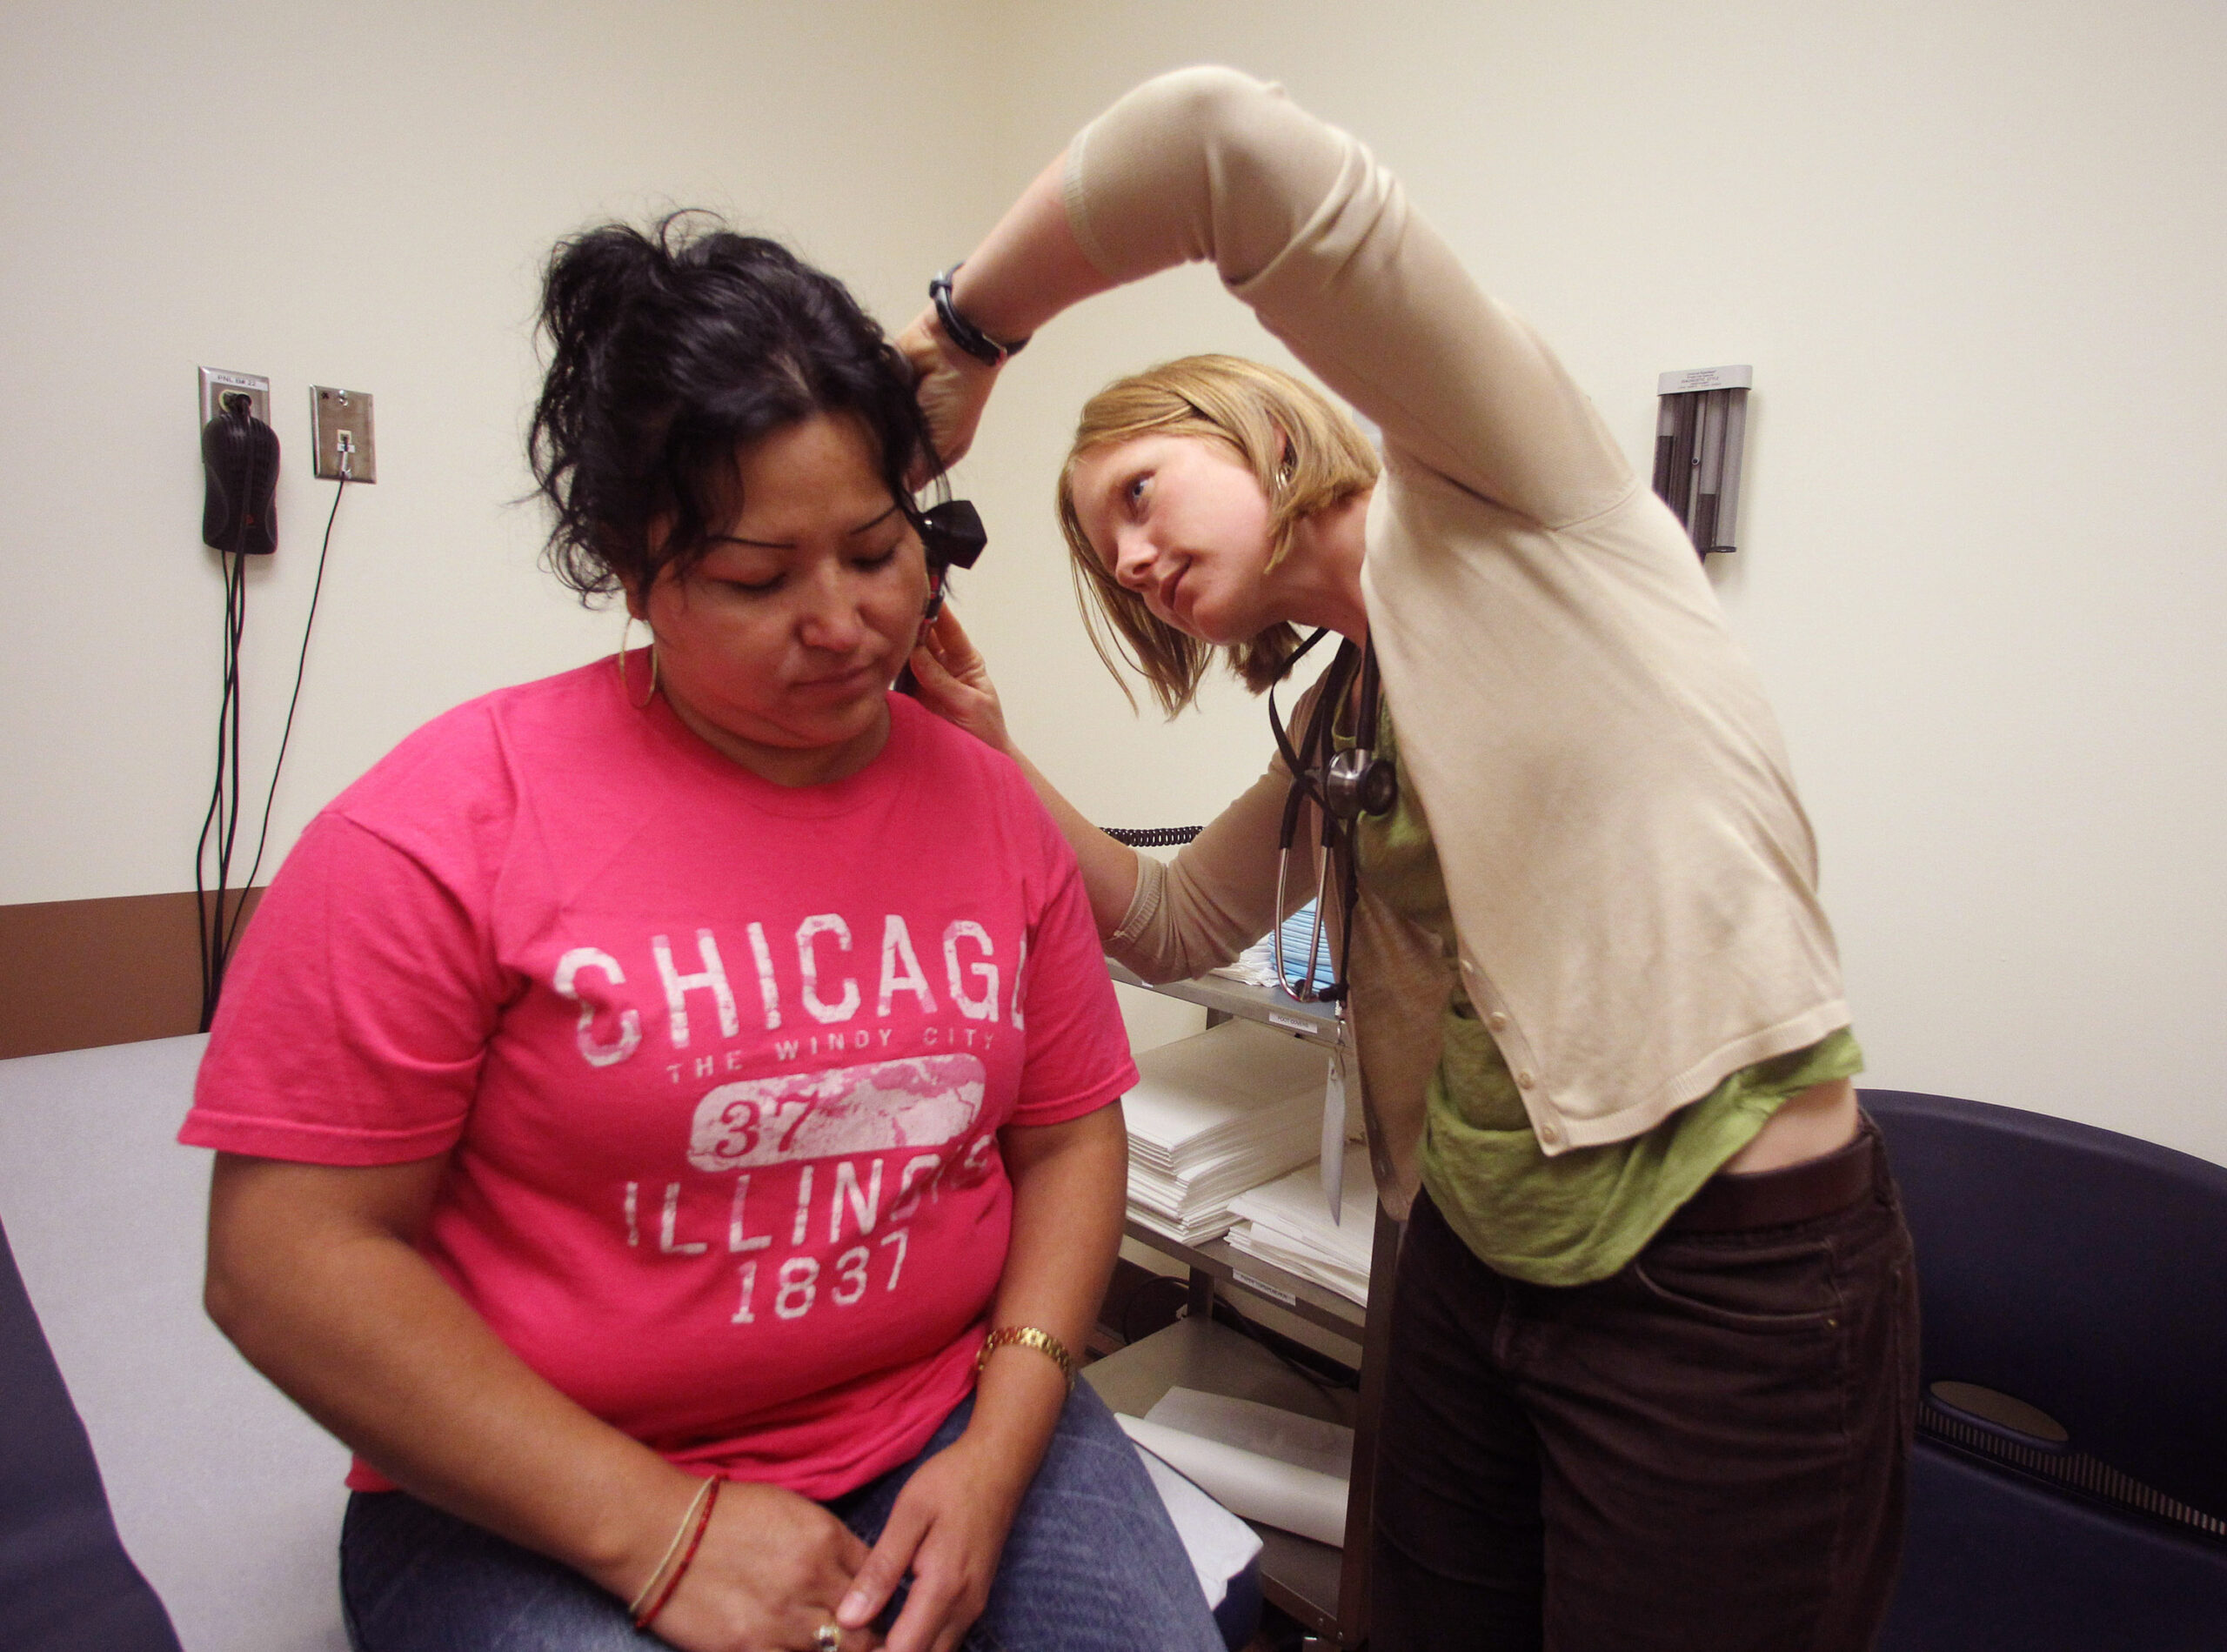 A physician assistant examining a patient